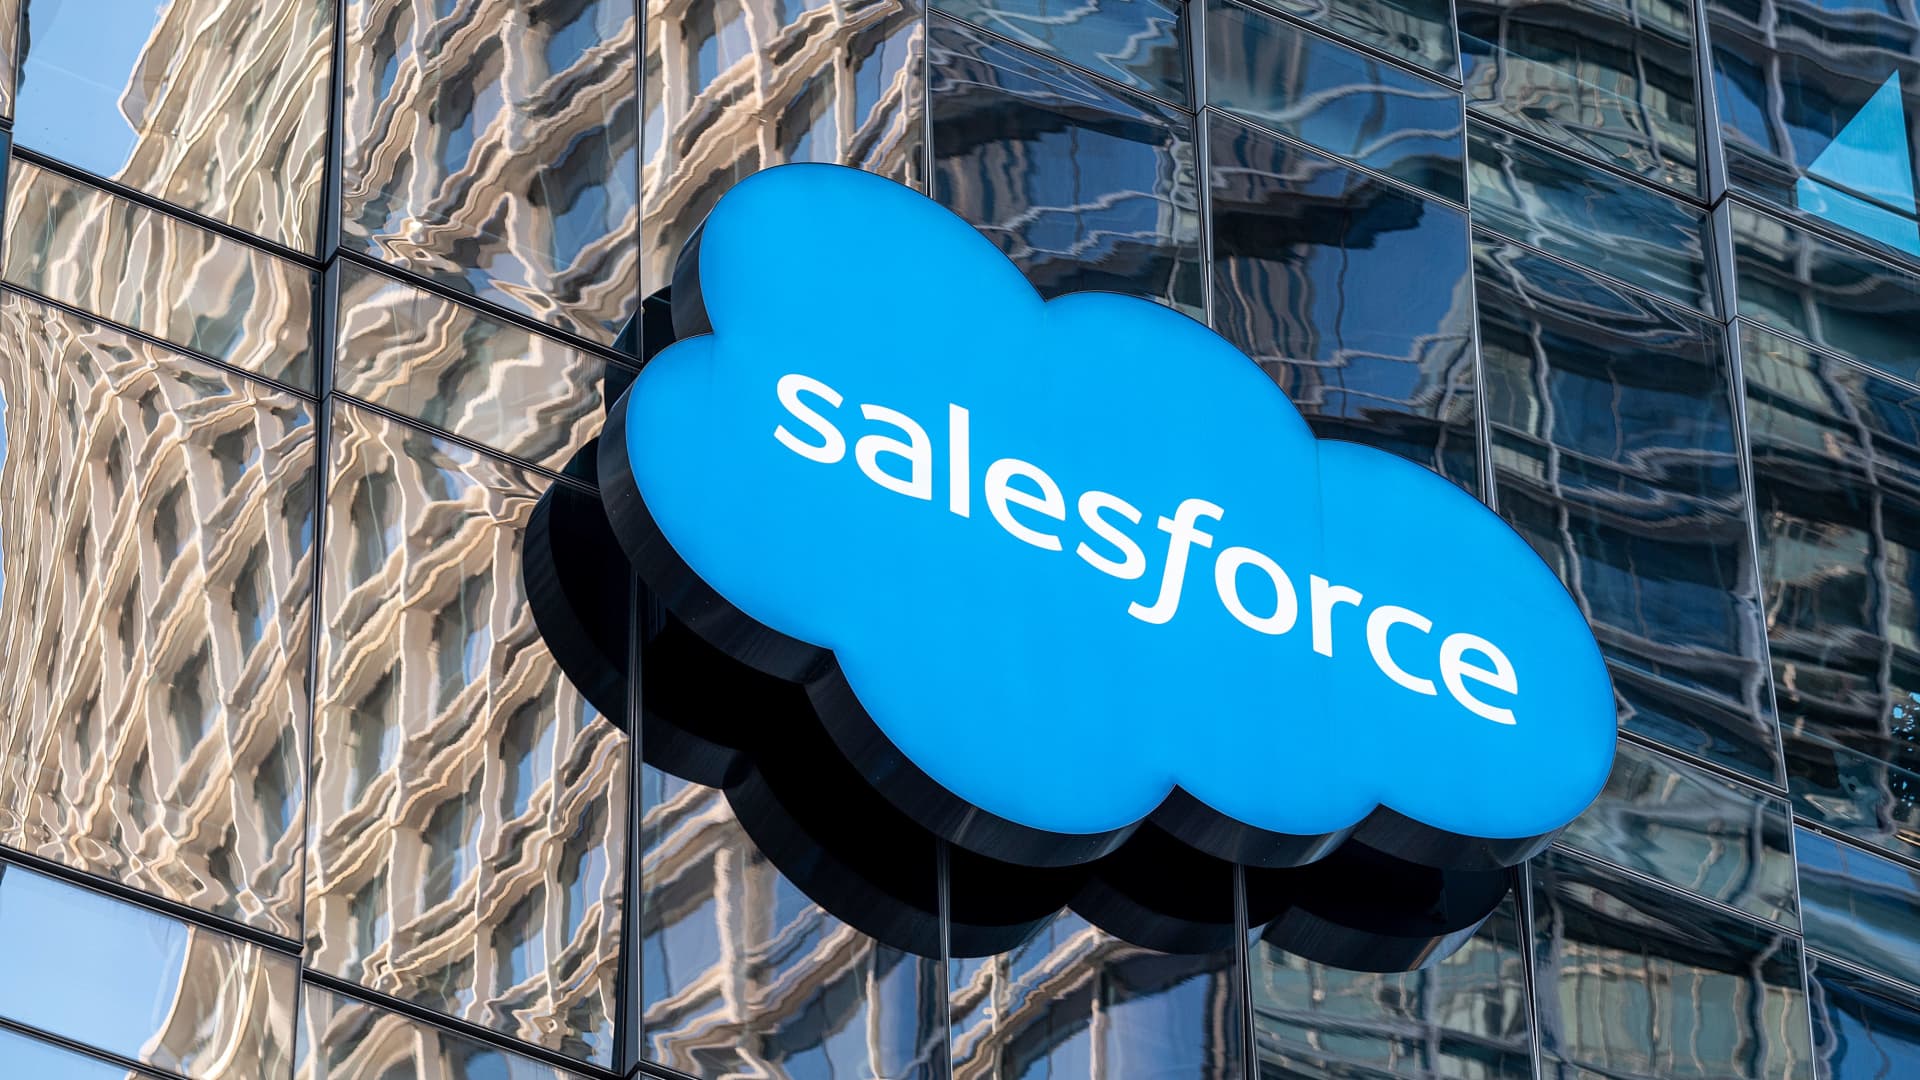 Facing growing calls for reform, Salesforce could use some fresh faces on its board - CNBC